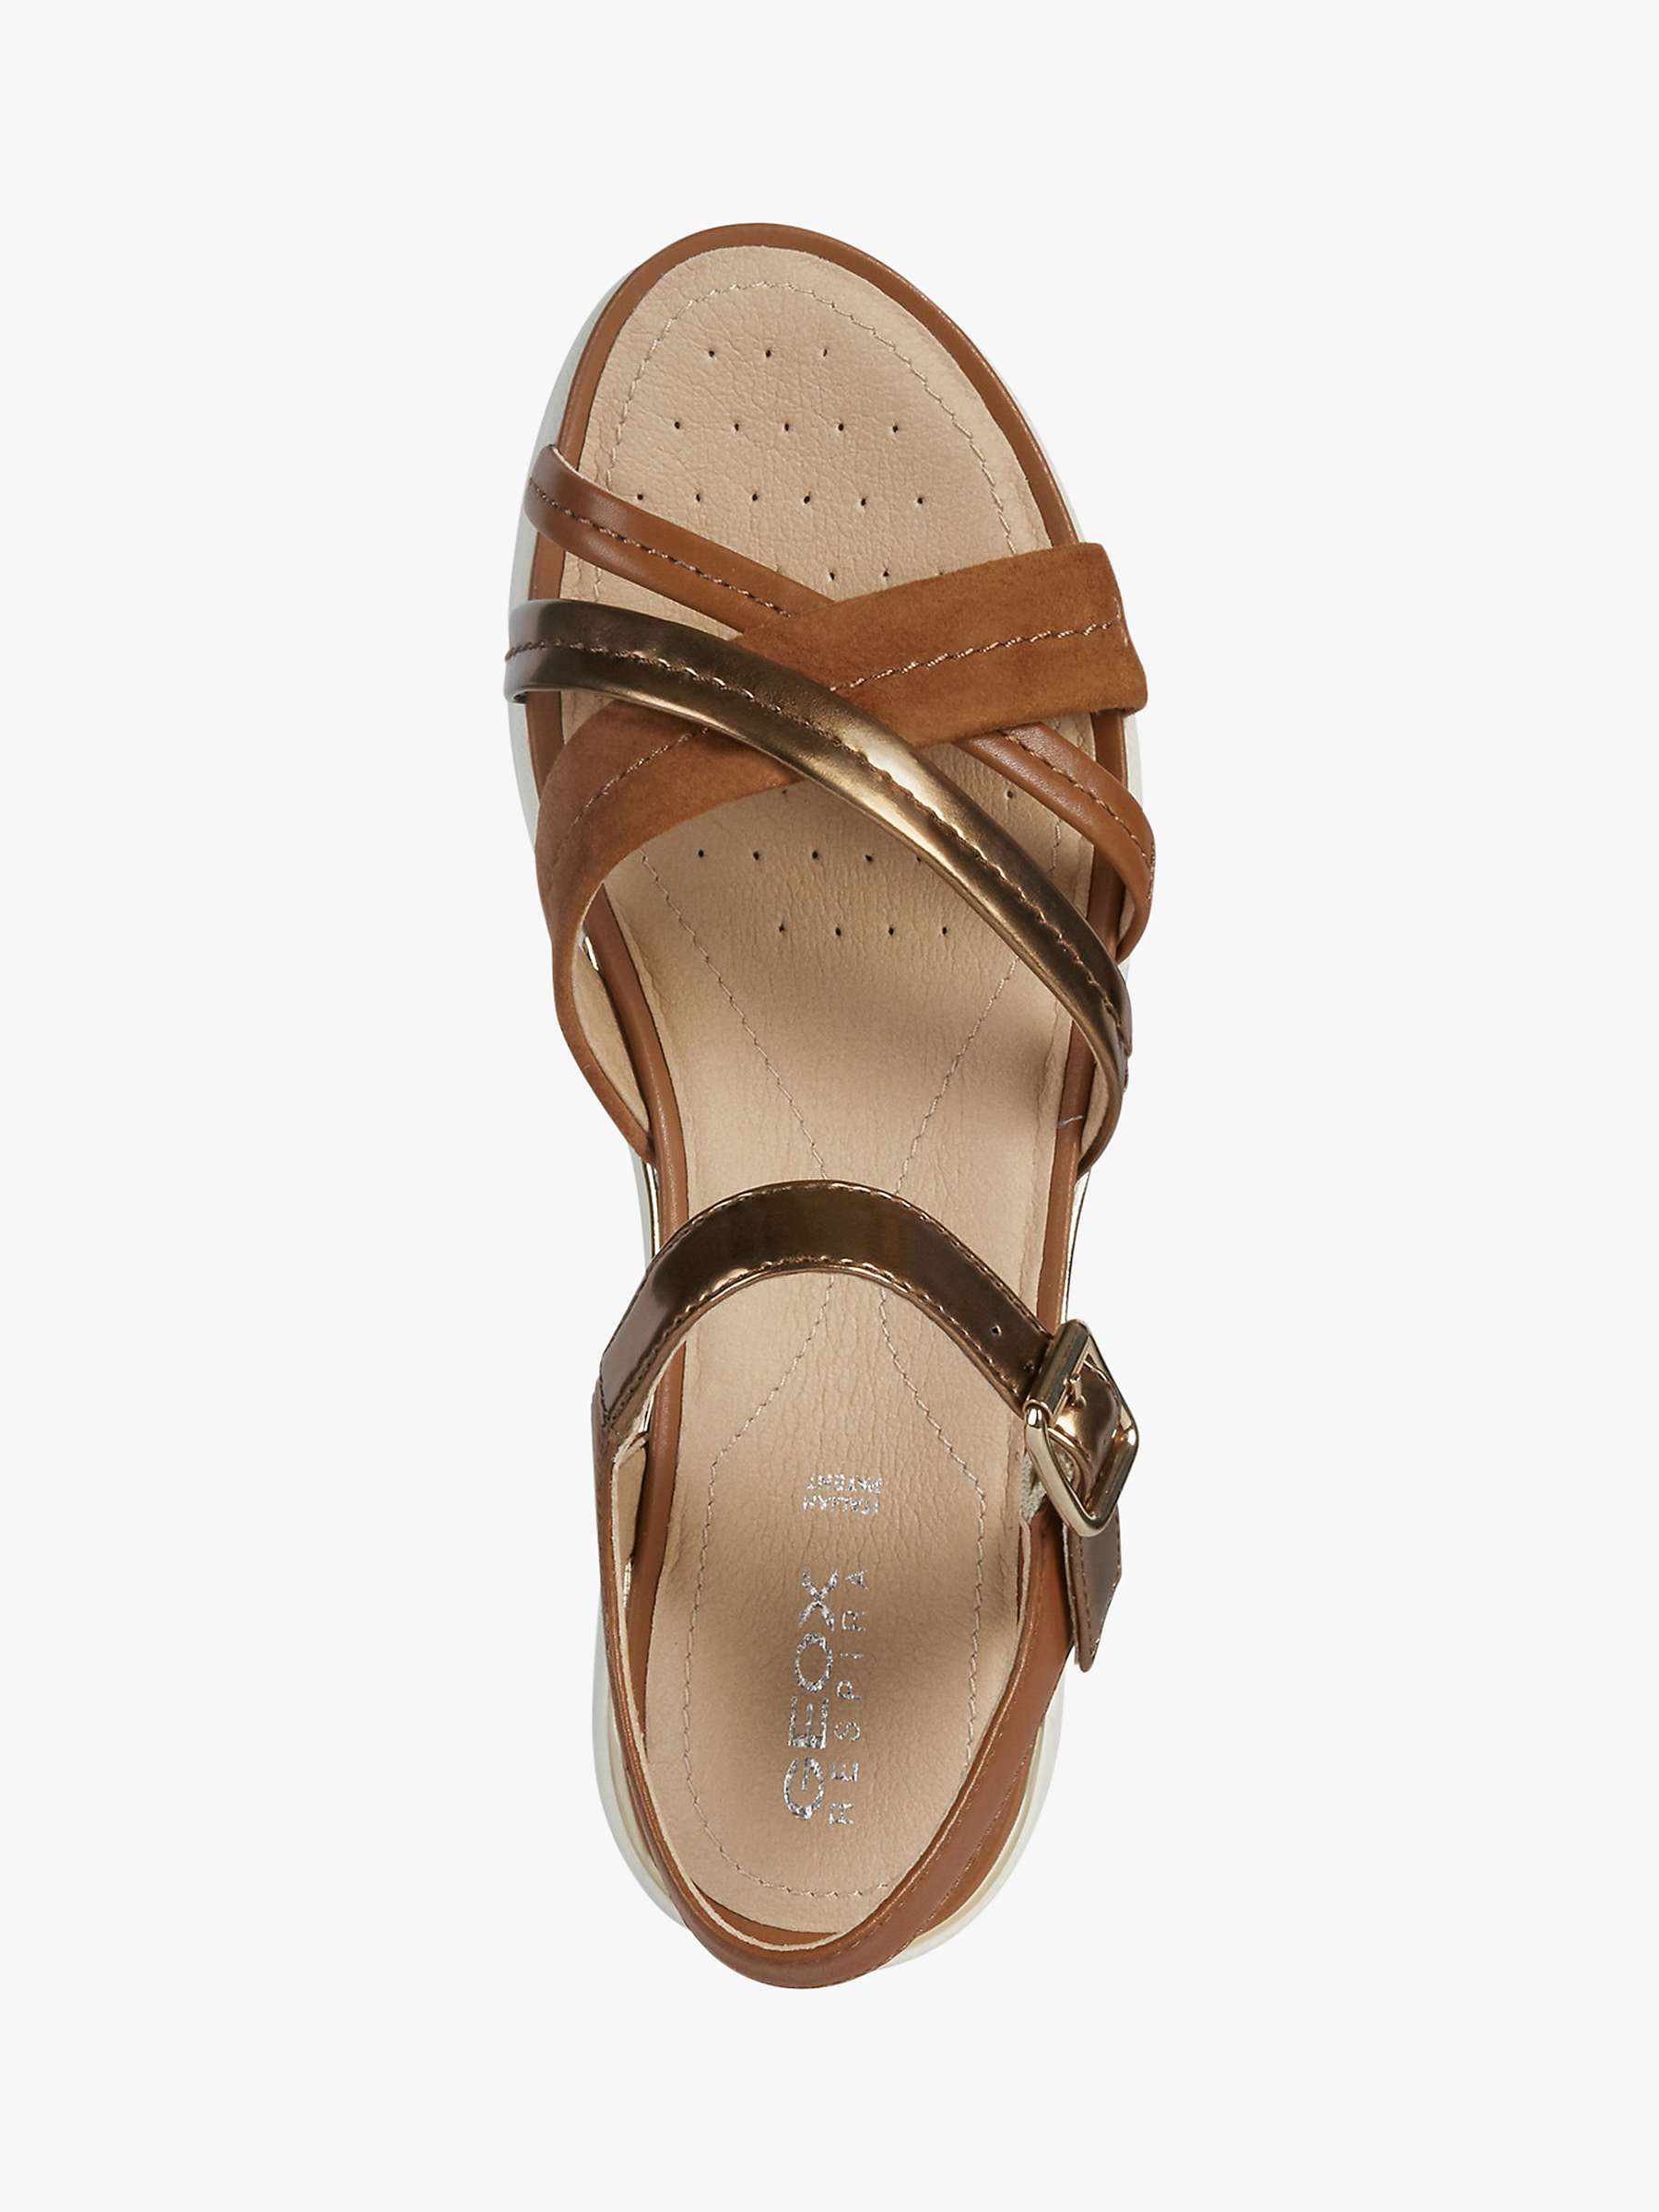 Buy Geox Women's Hiver Leather Cross Over Sandals Online at johnlewis.com